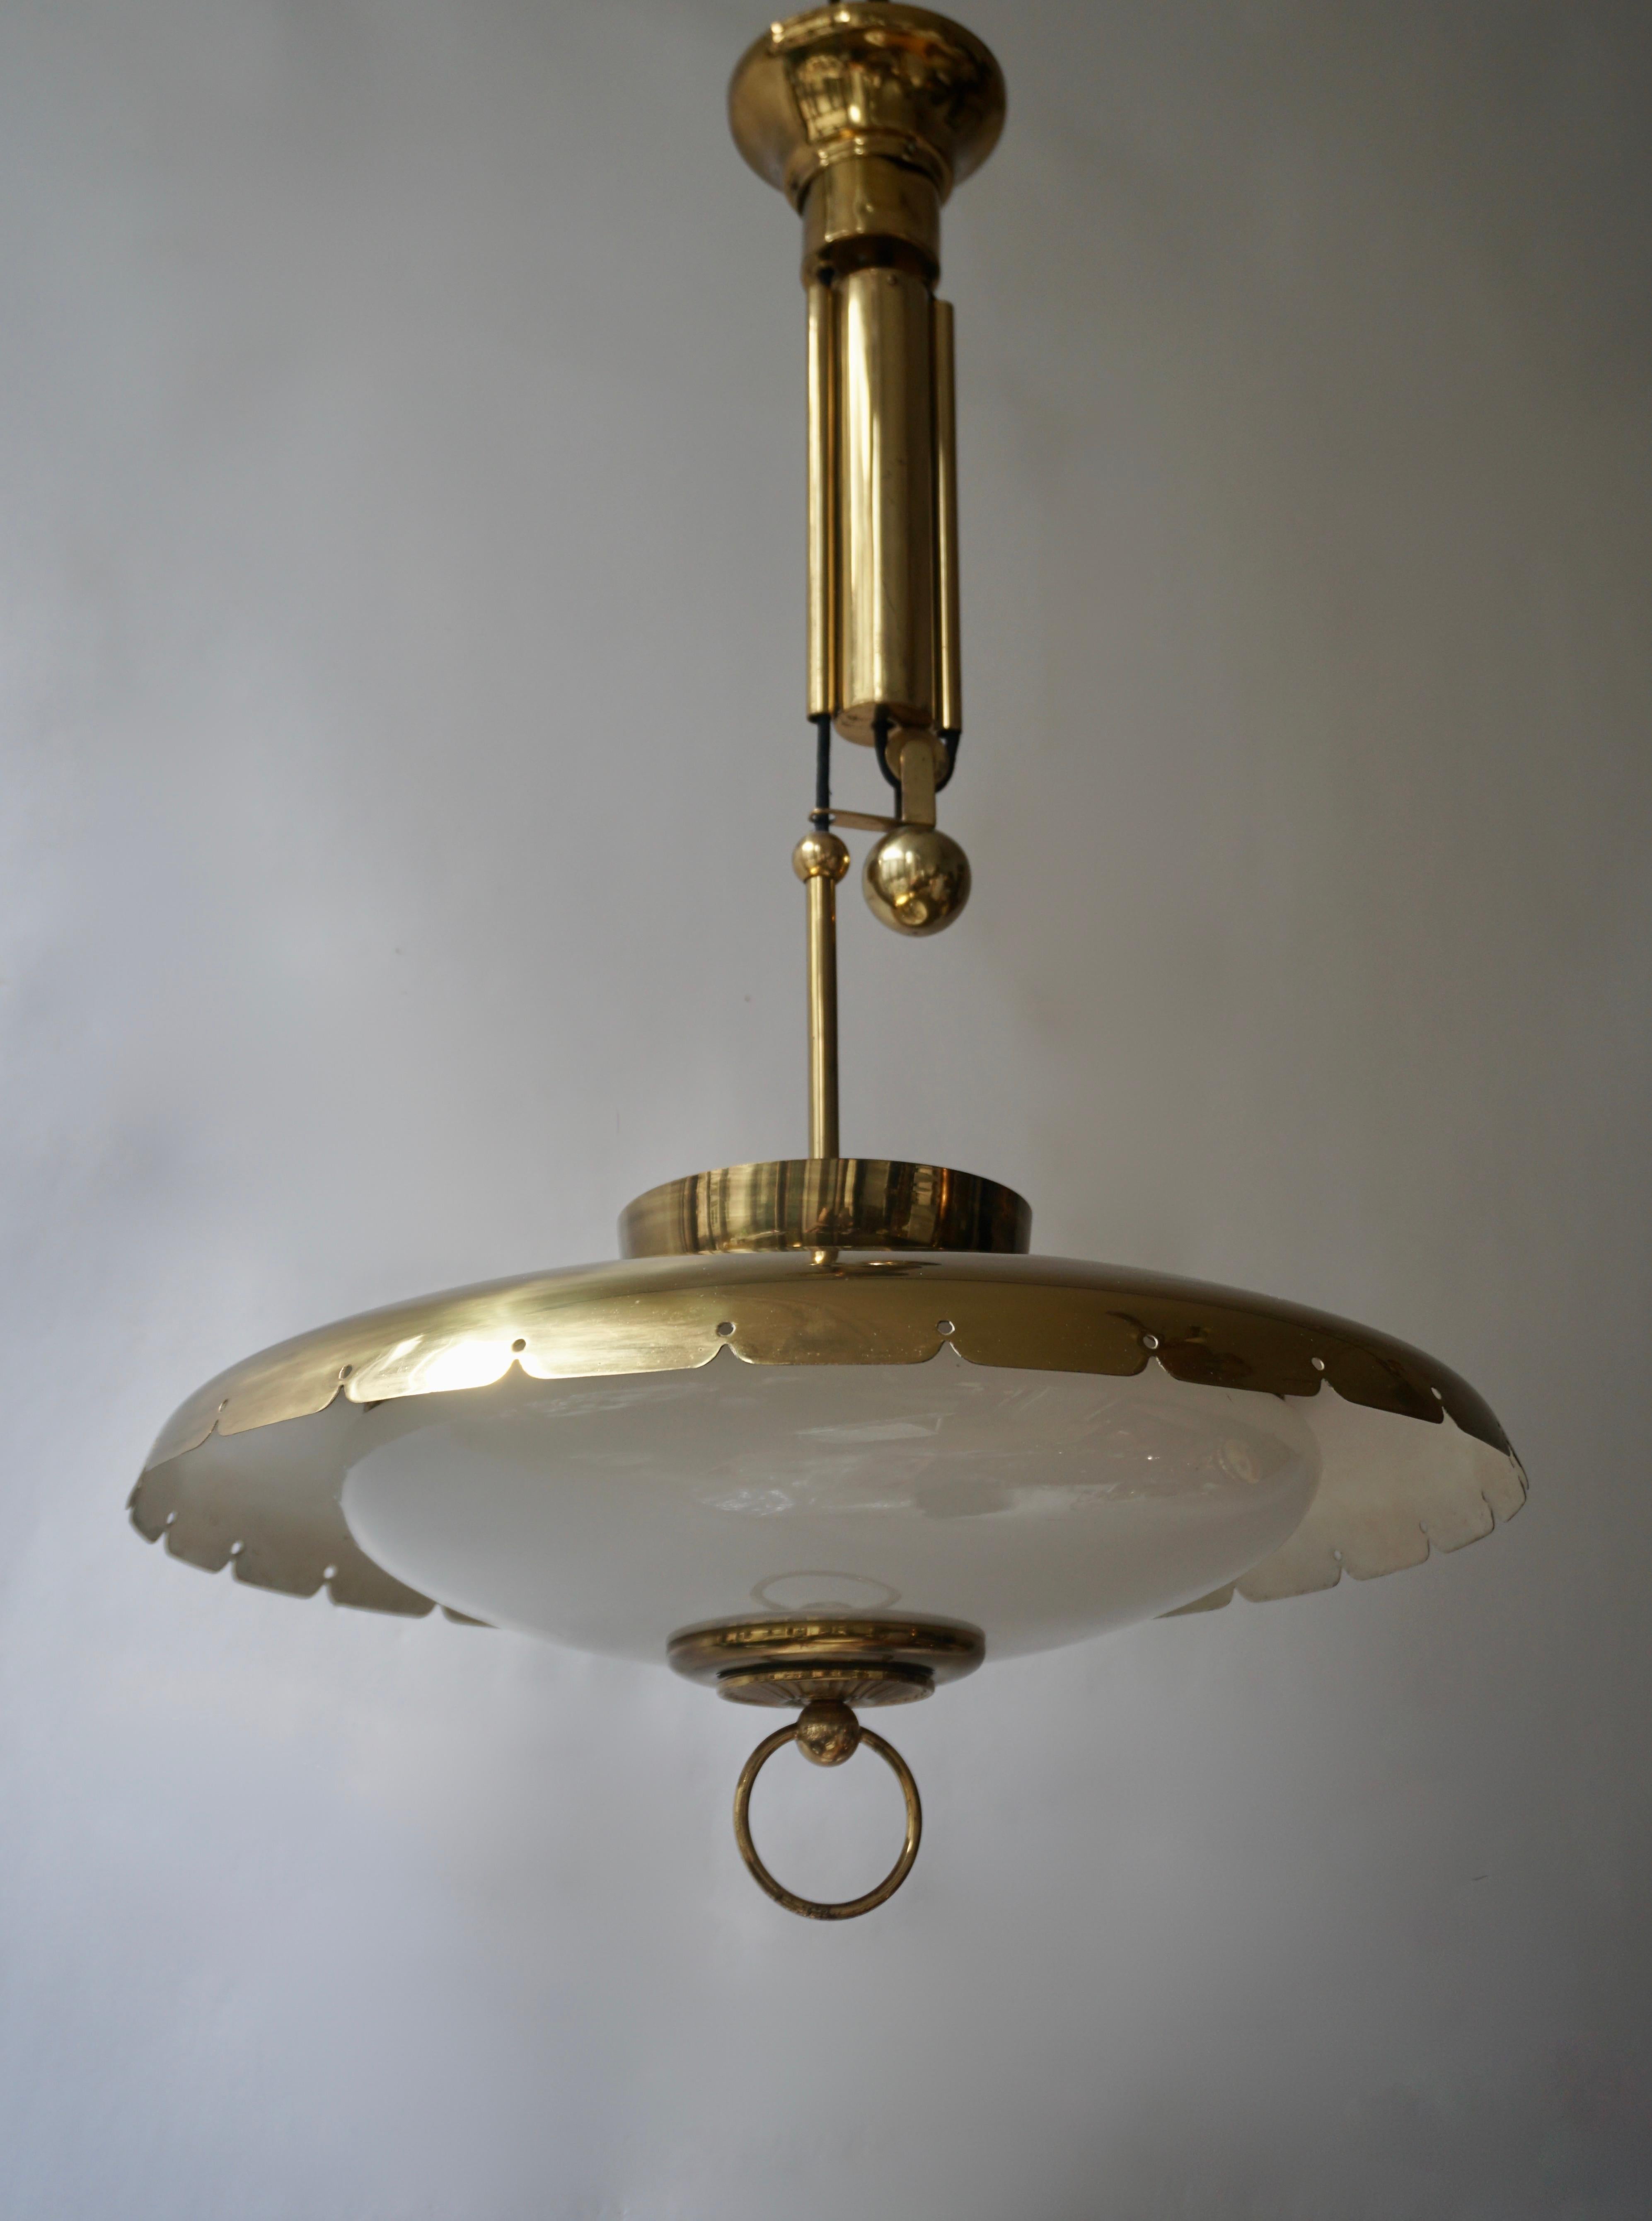 Extremely rare and elegant Mid-Century Modern counterweight / pulley brass and Murano glass pendant lamp or hanging light. 
Executed in perforated brass sheet, it comes with two x E27 Edison screw fit bulb holder, is wired, and in working